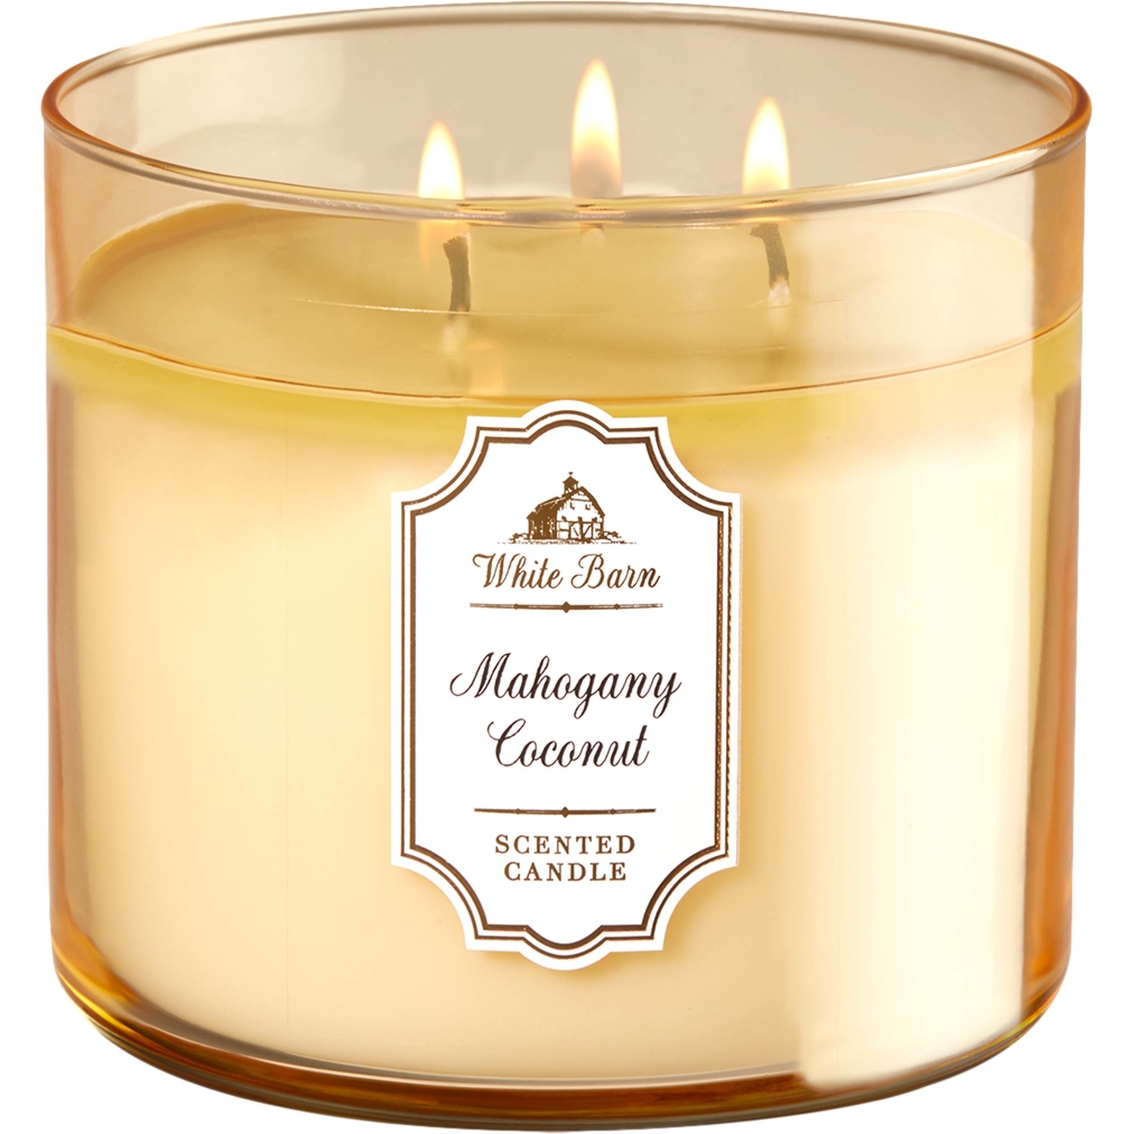 2 Mahogany Coconut Scented Candle Bath & Body Works 14.5 Oz 